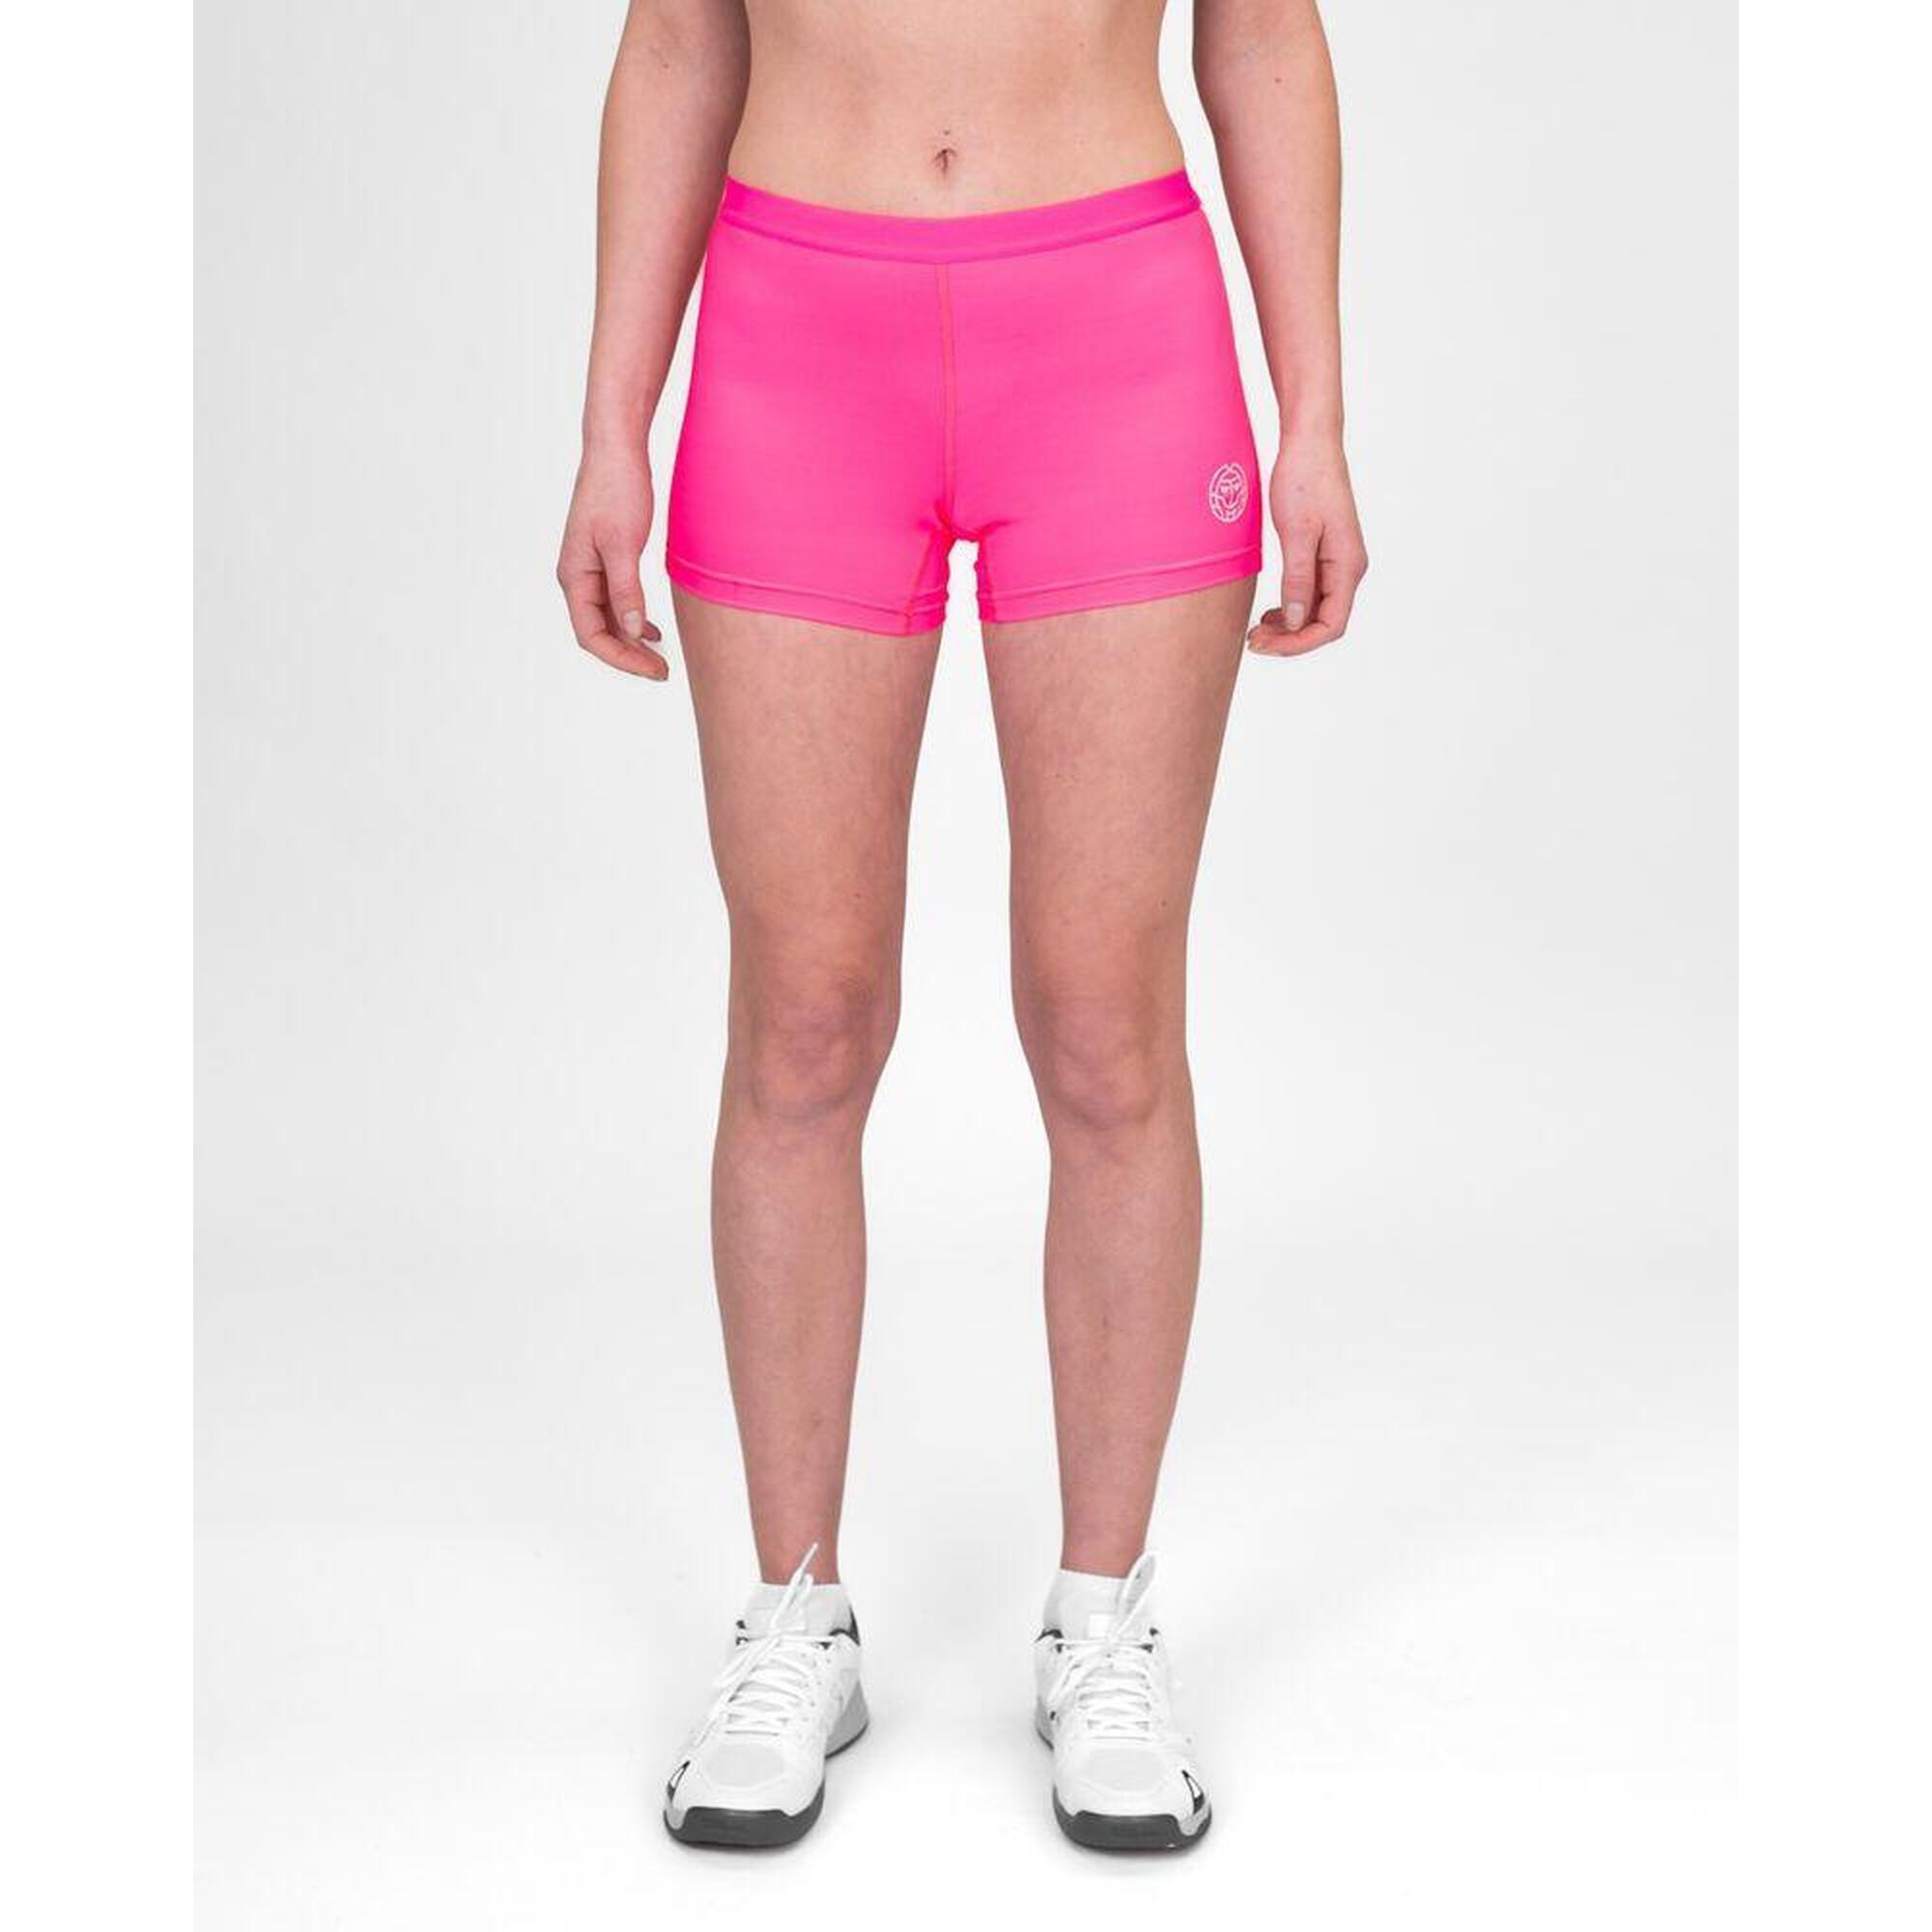 Crew Shorty - pink